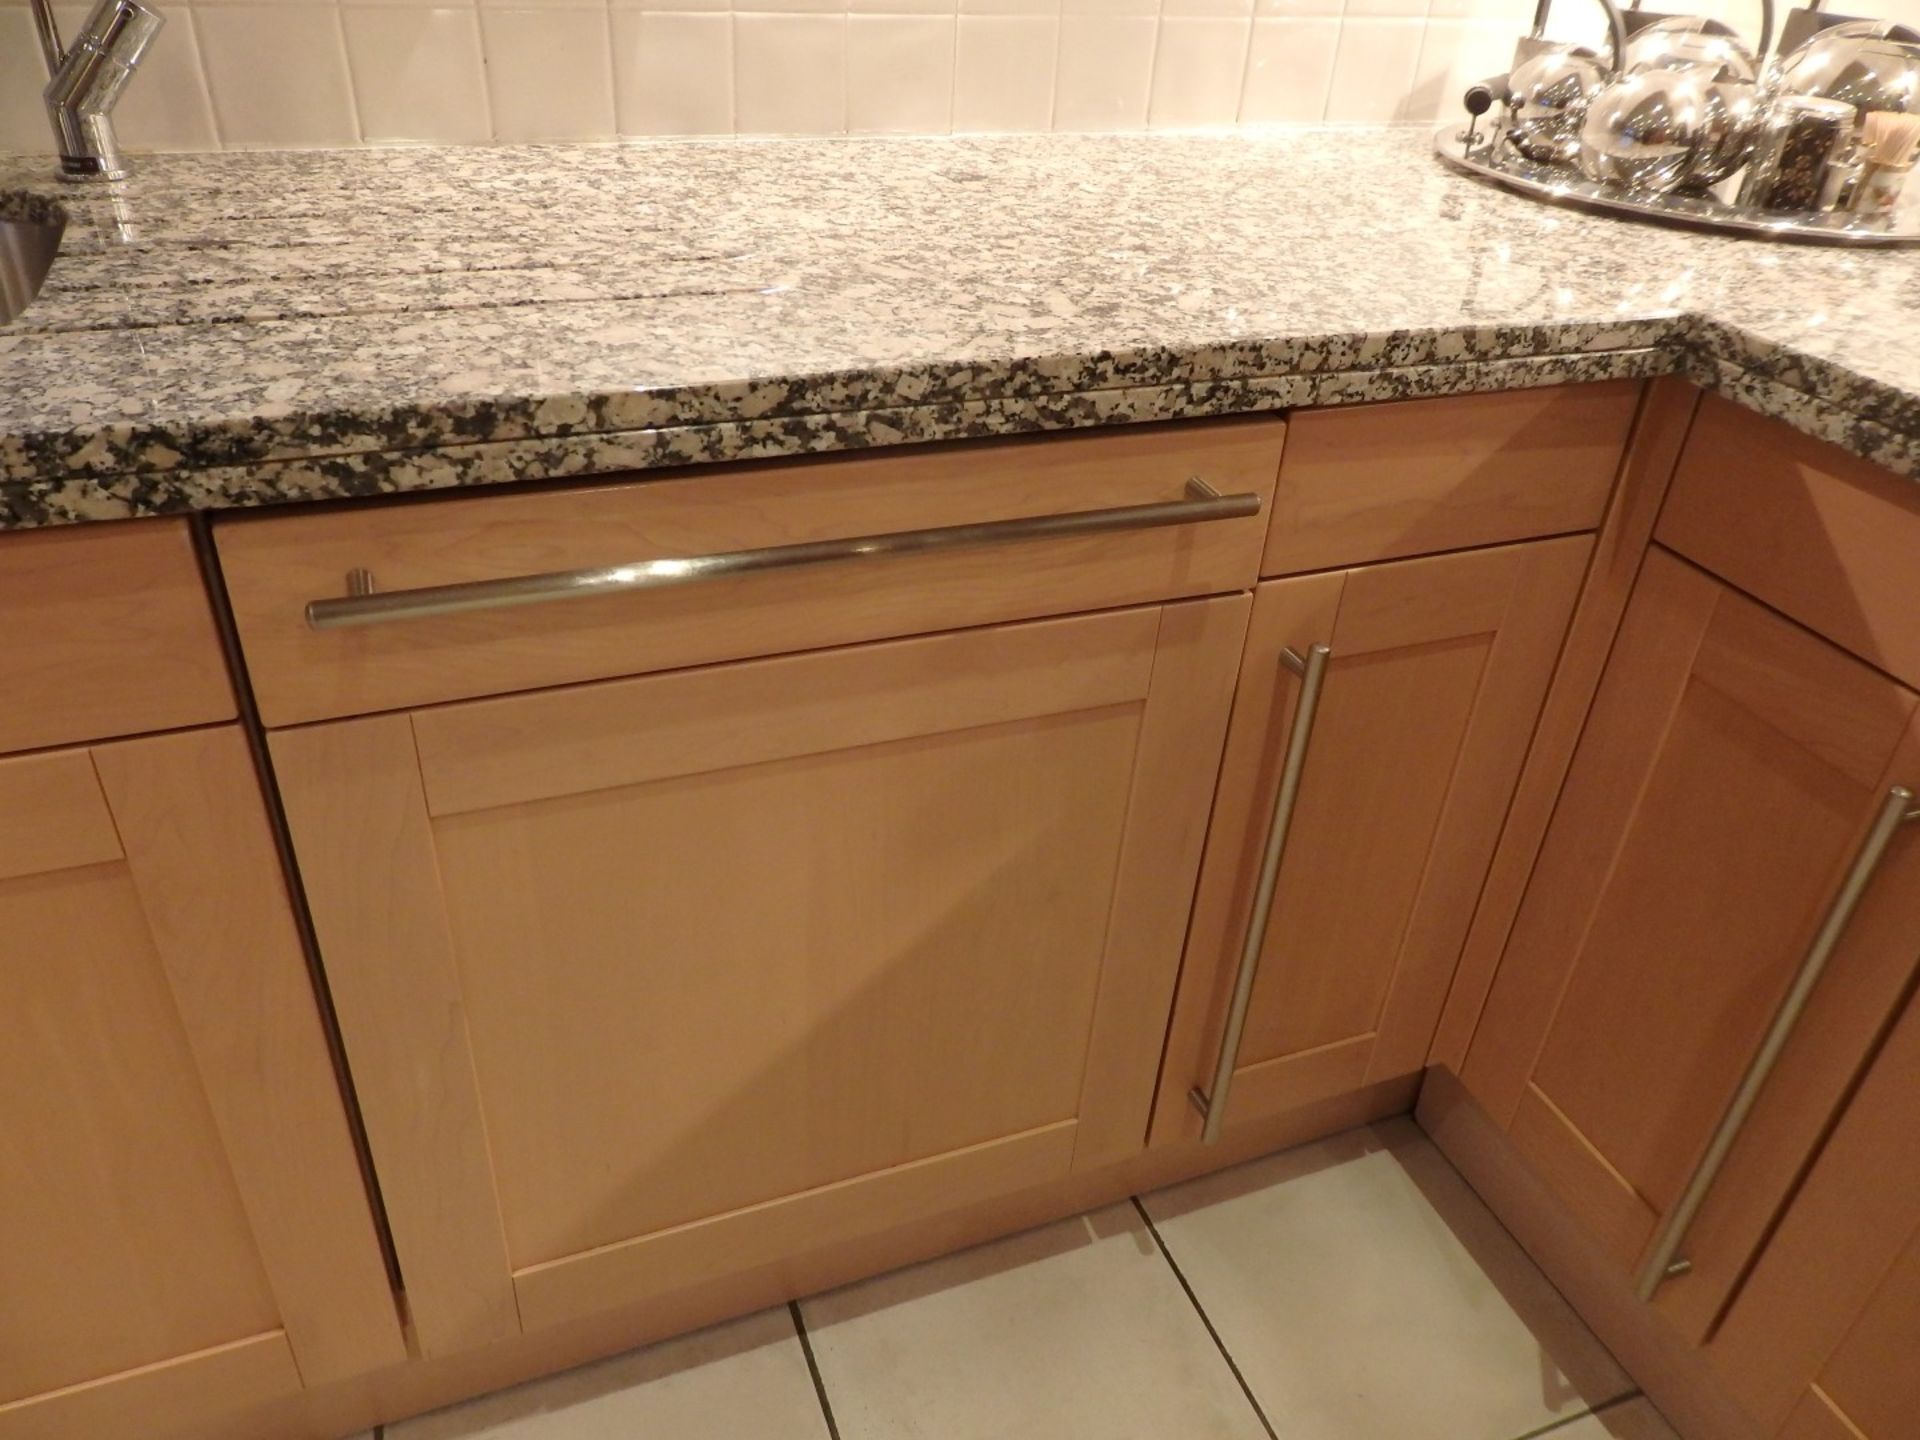 1 x Siematic Fitted Kitchen With Beech Shaker Style Doors, Granite Worktops, Central Island and - Image 31 of 151